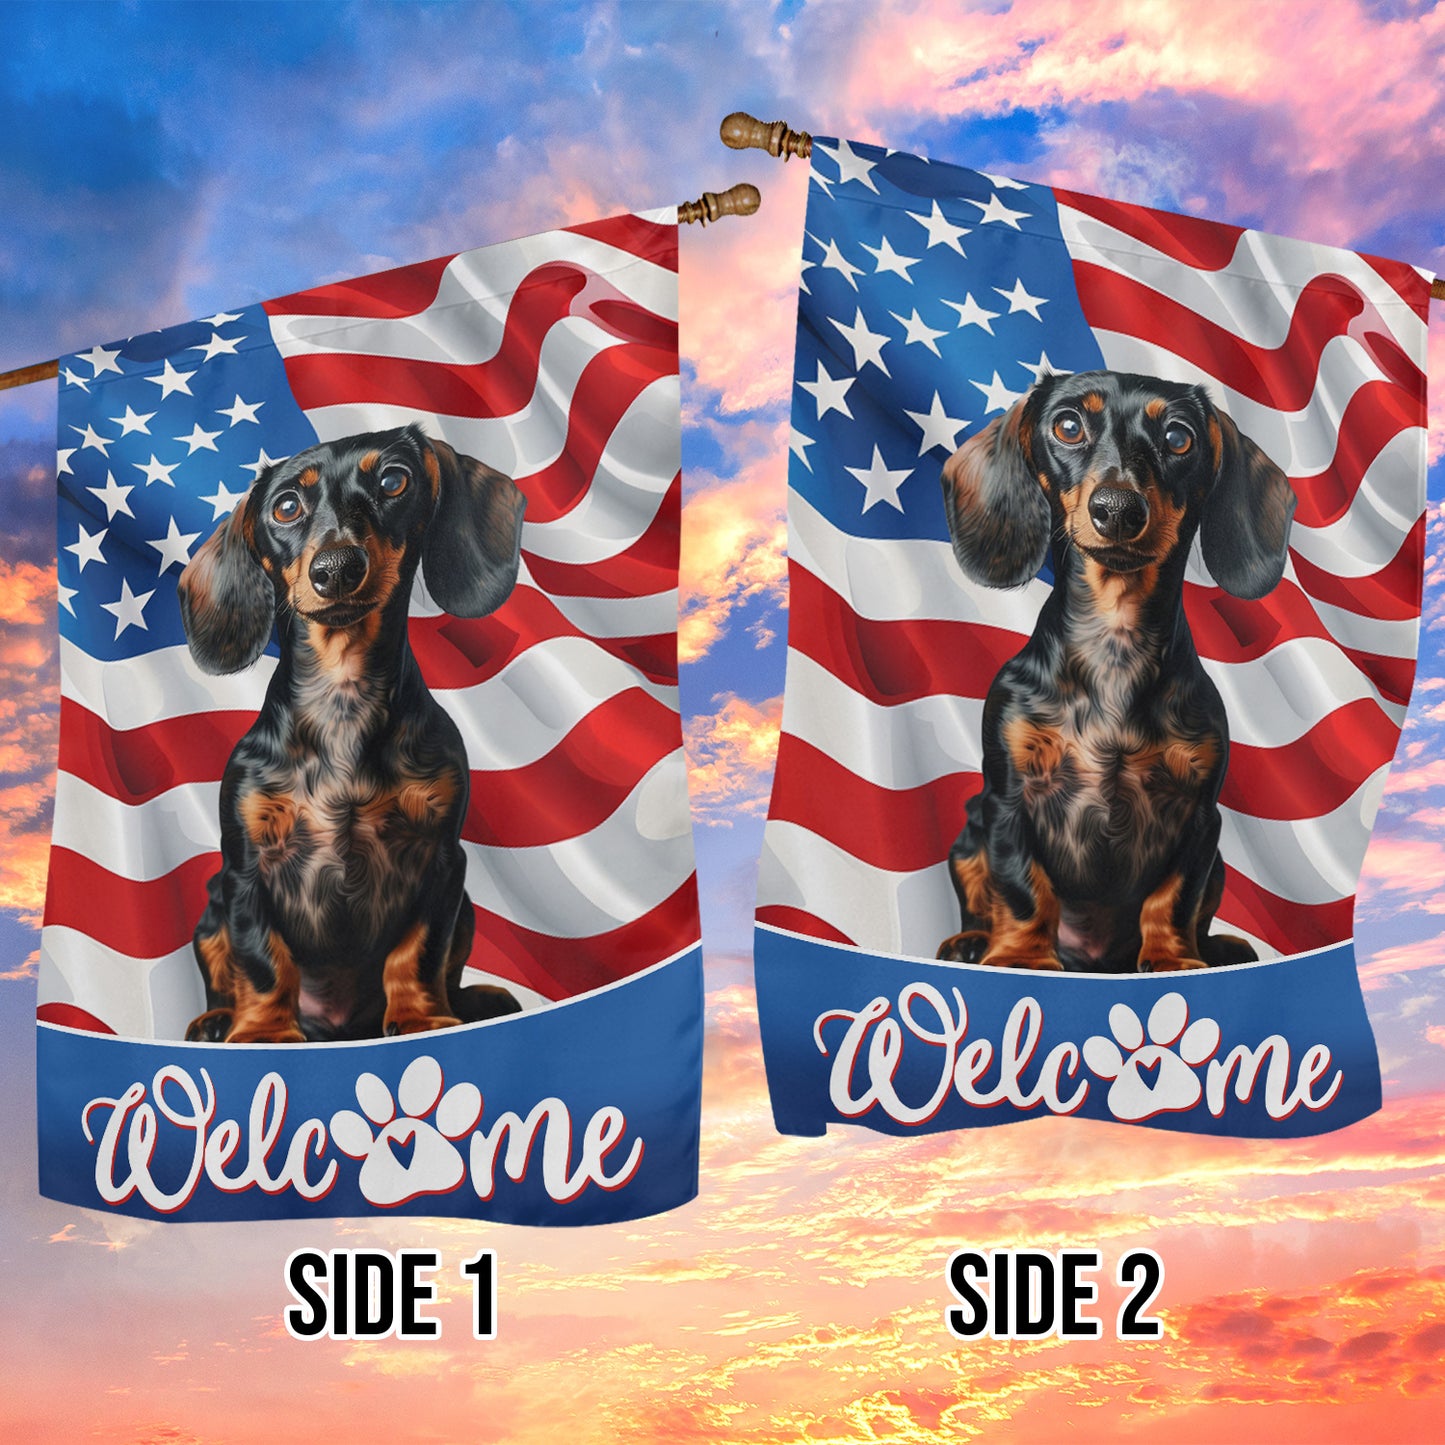 July 4th Dachshund Dog Garden Flag House Flag Welcome Independence Day Yard Flag Gift For Dachshund Dog Lovers